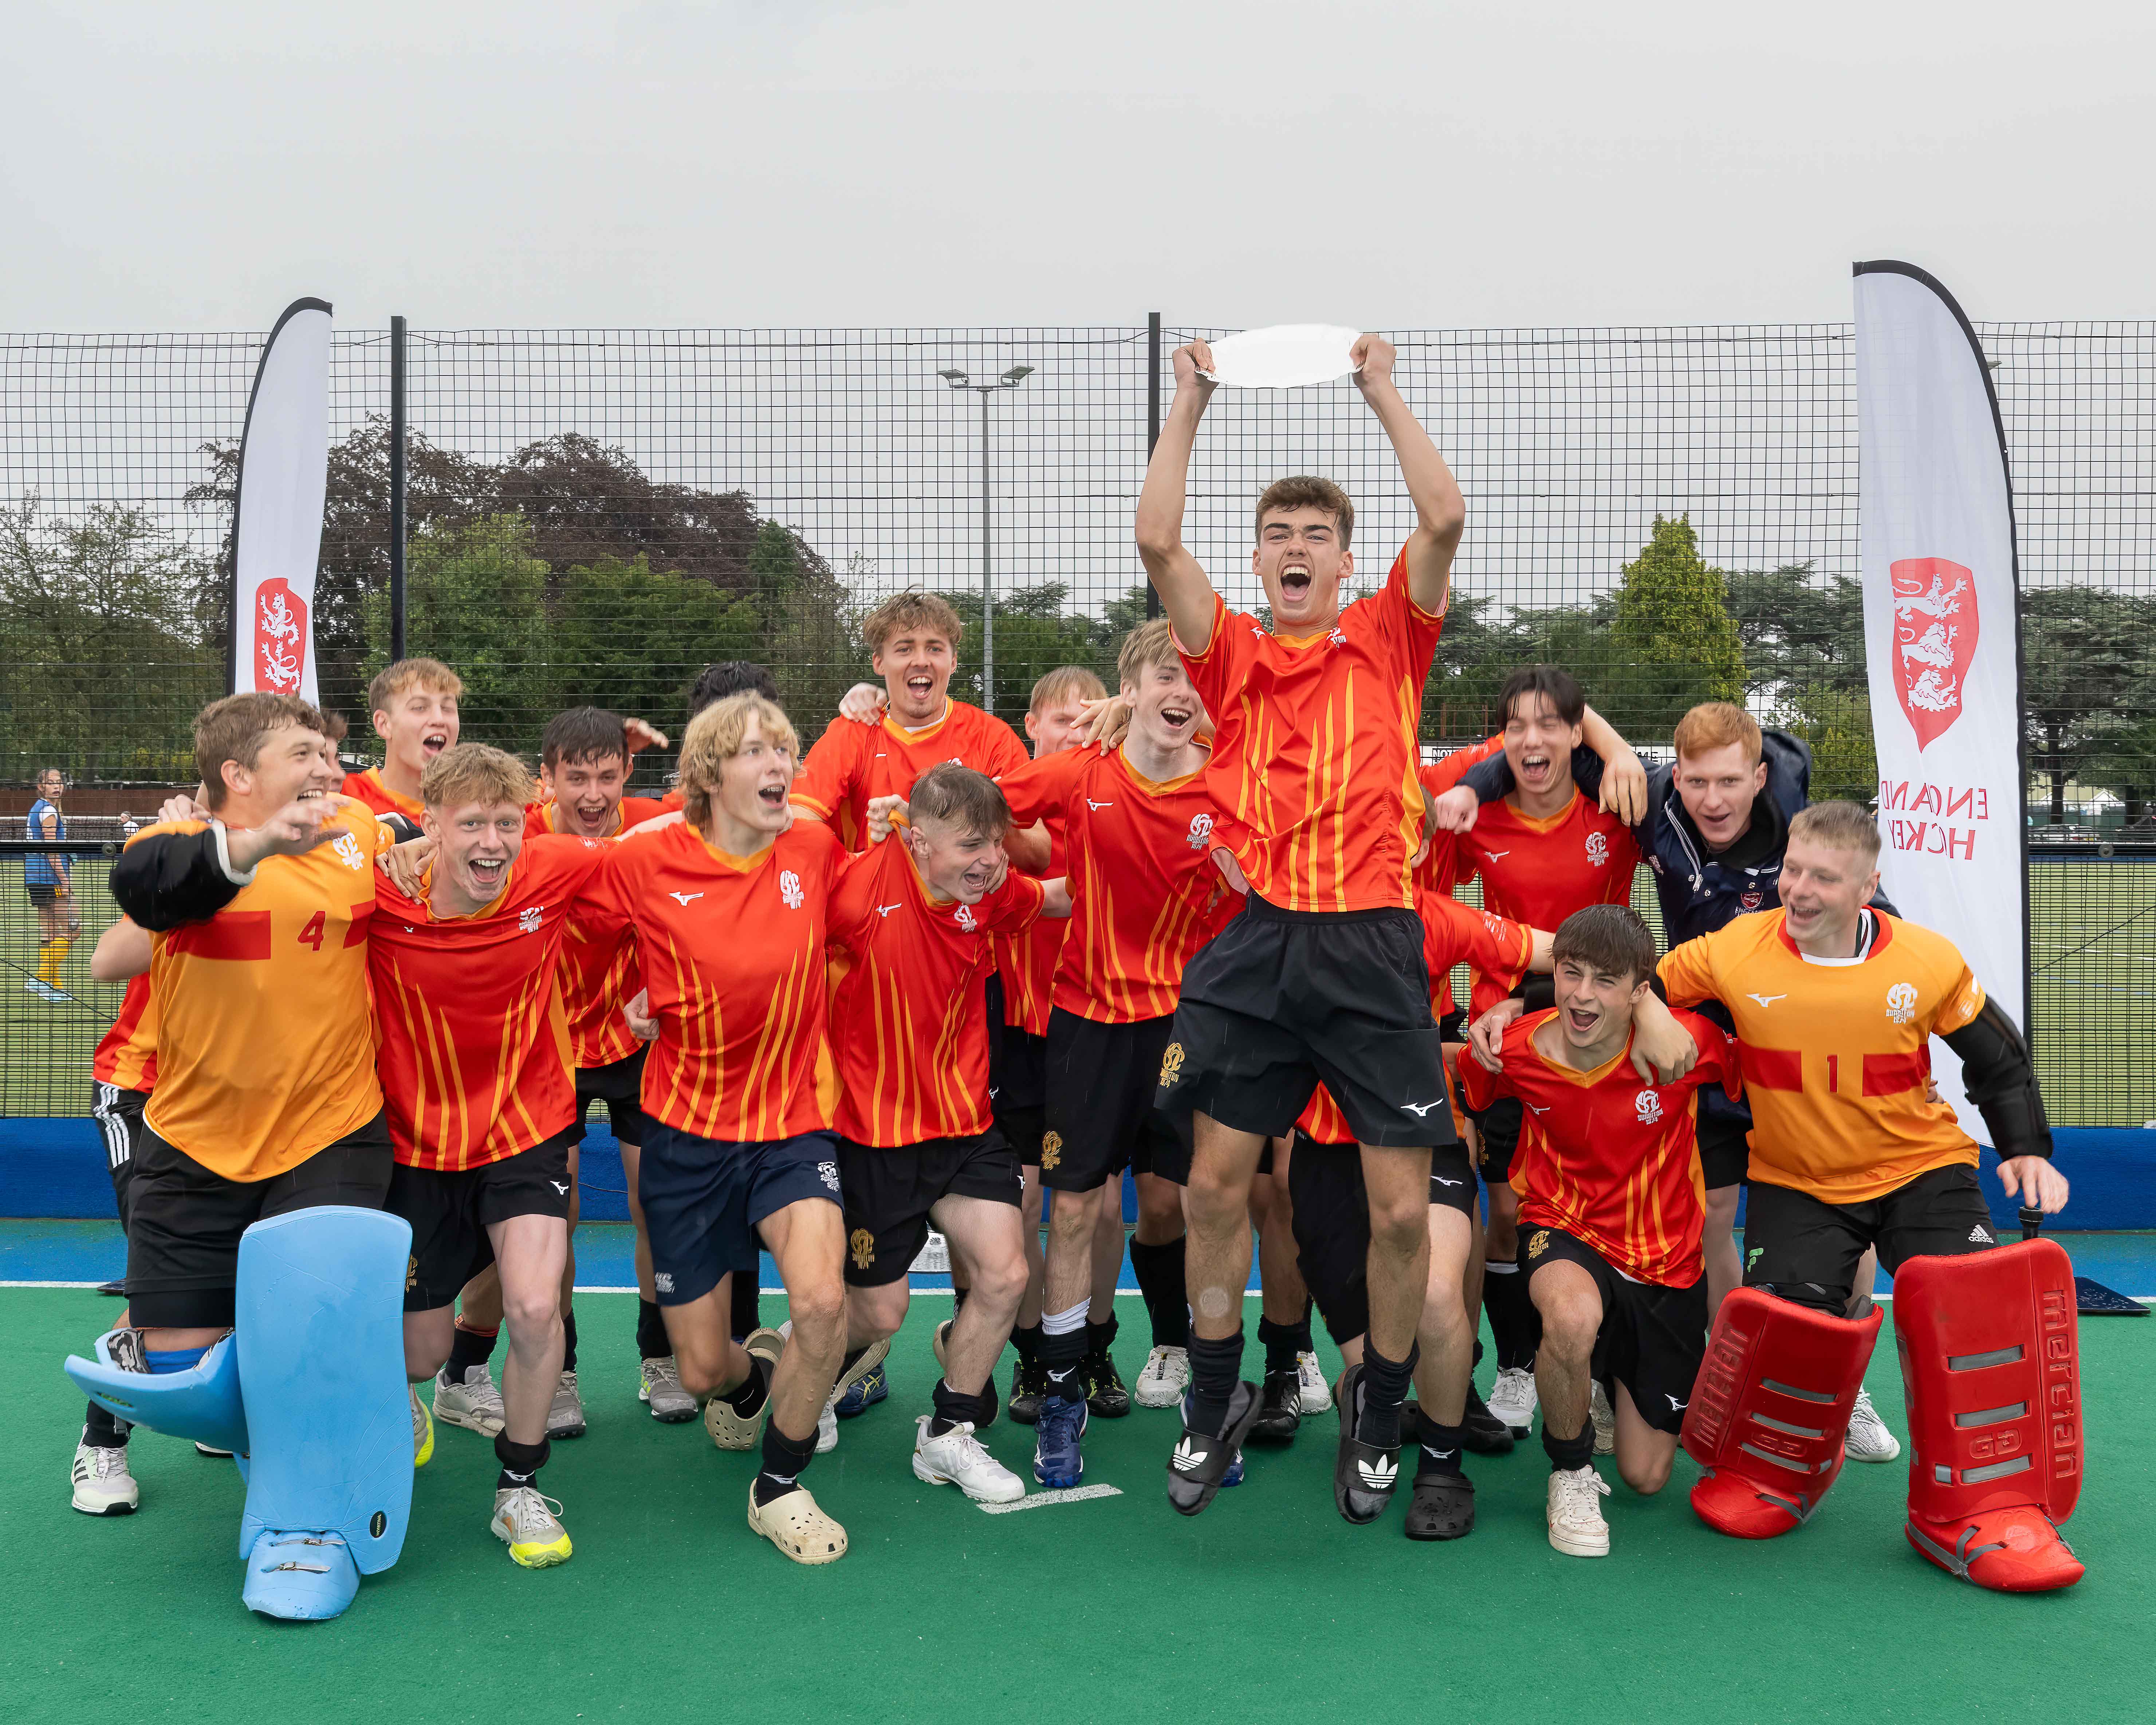 20230730 DPM EHTA Boys Presentations%20%200010 Edit%20copy - England: Building A Person-centred Talent System - Early Signs Of Success - An athlete-centred approach involving increased collaboration is key to the transformation of England Hockey’s talent system and the early signs are promising.   